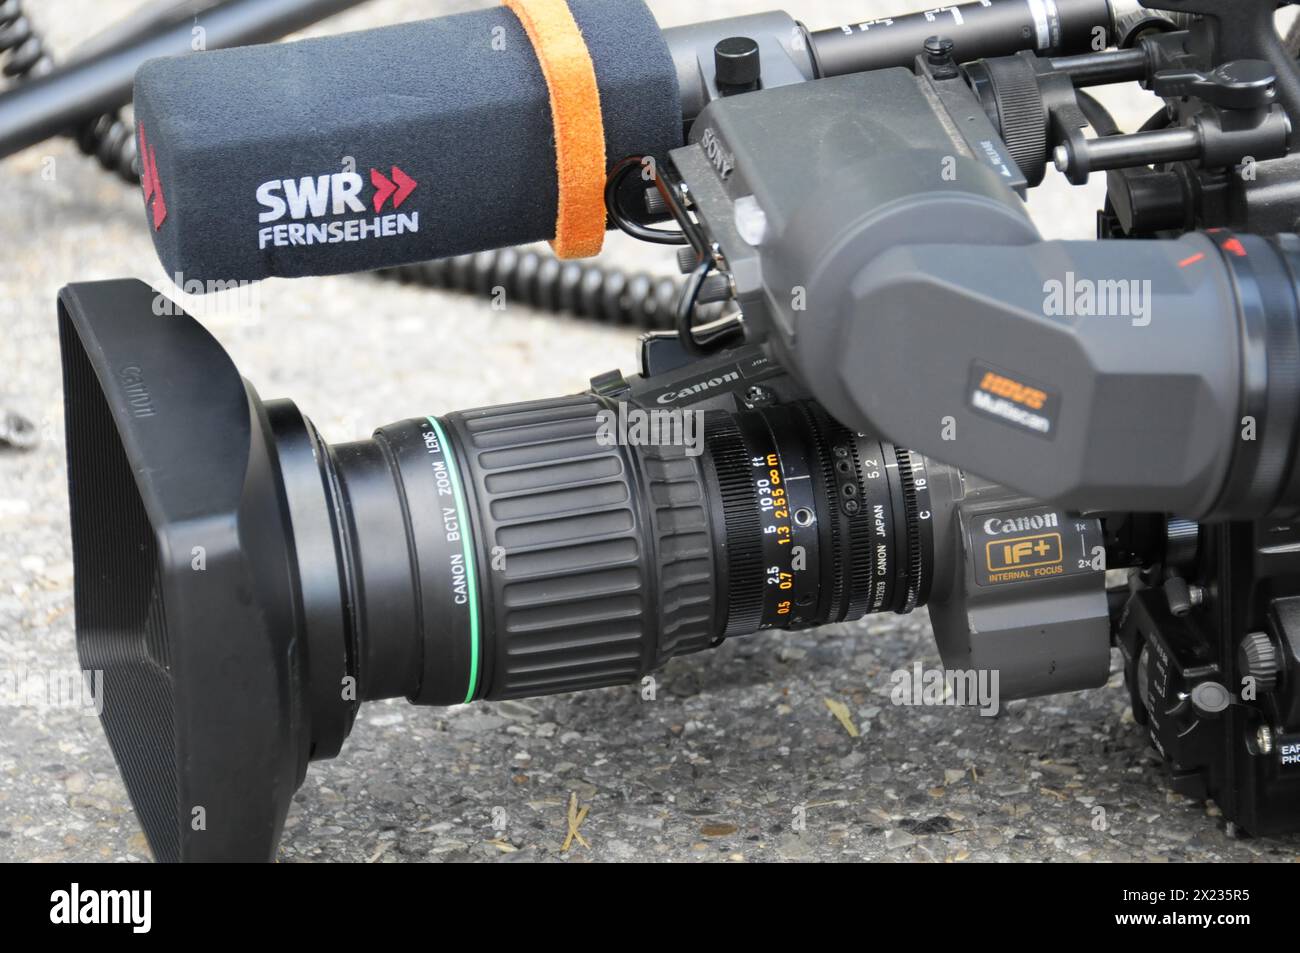 Professional television camera with SWR microphone set up for a recording, SOLITUDE REVIVAL 2011, Stuttgart, Baden-Wuerttemberg, Germany Stock Photo